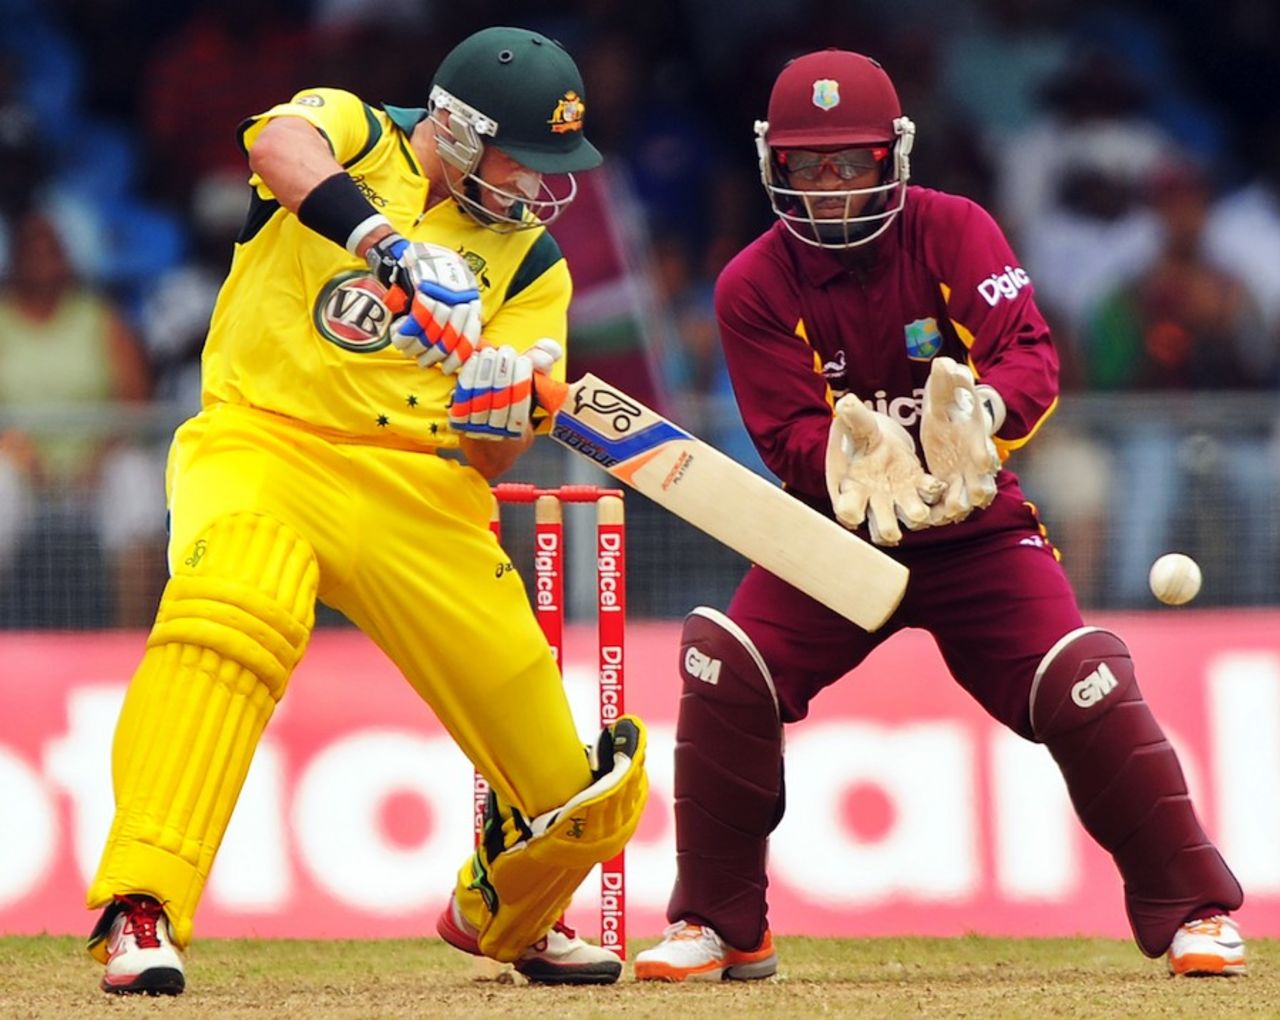 Michael Hussey cuts during his innings of 32, West Indies v Australia, 1st ODI, St Vincent, March 16, 2012